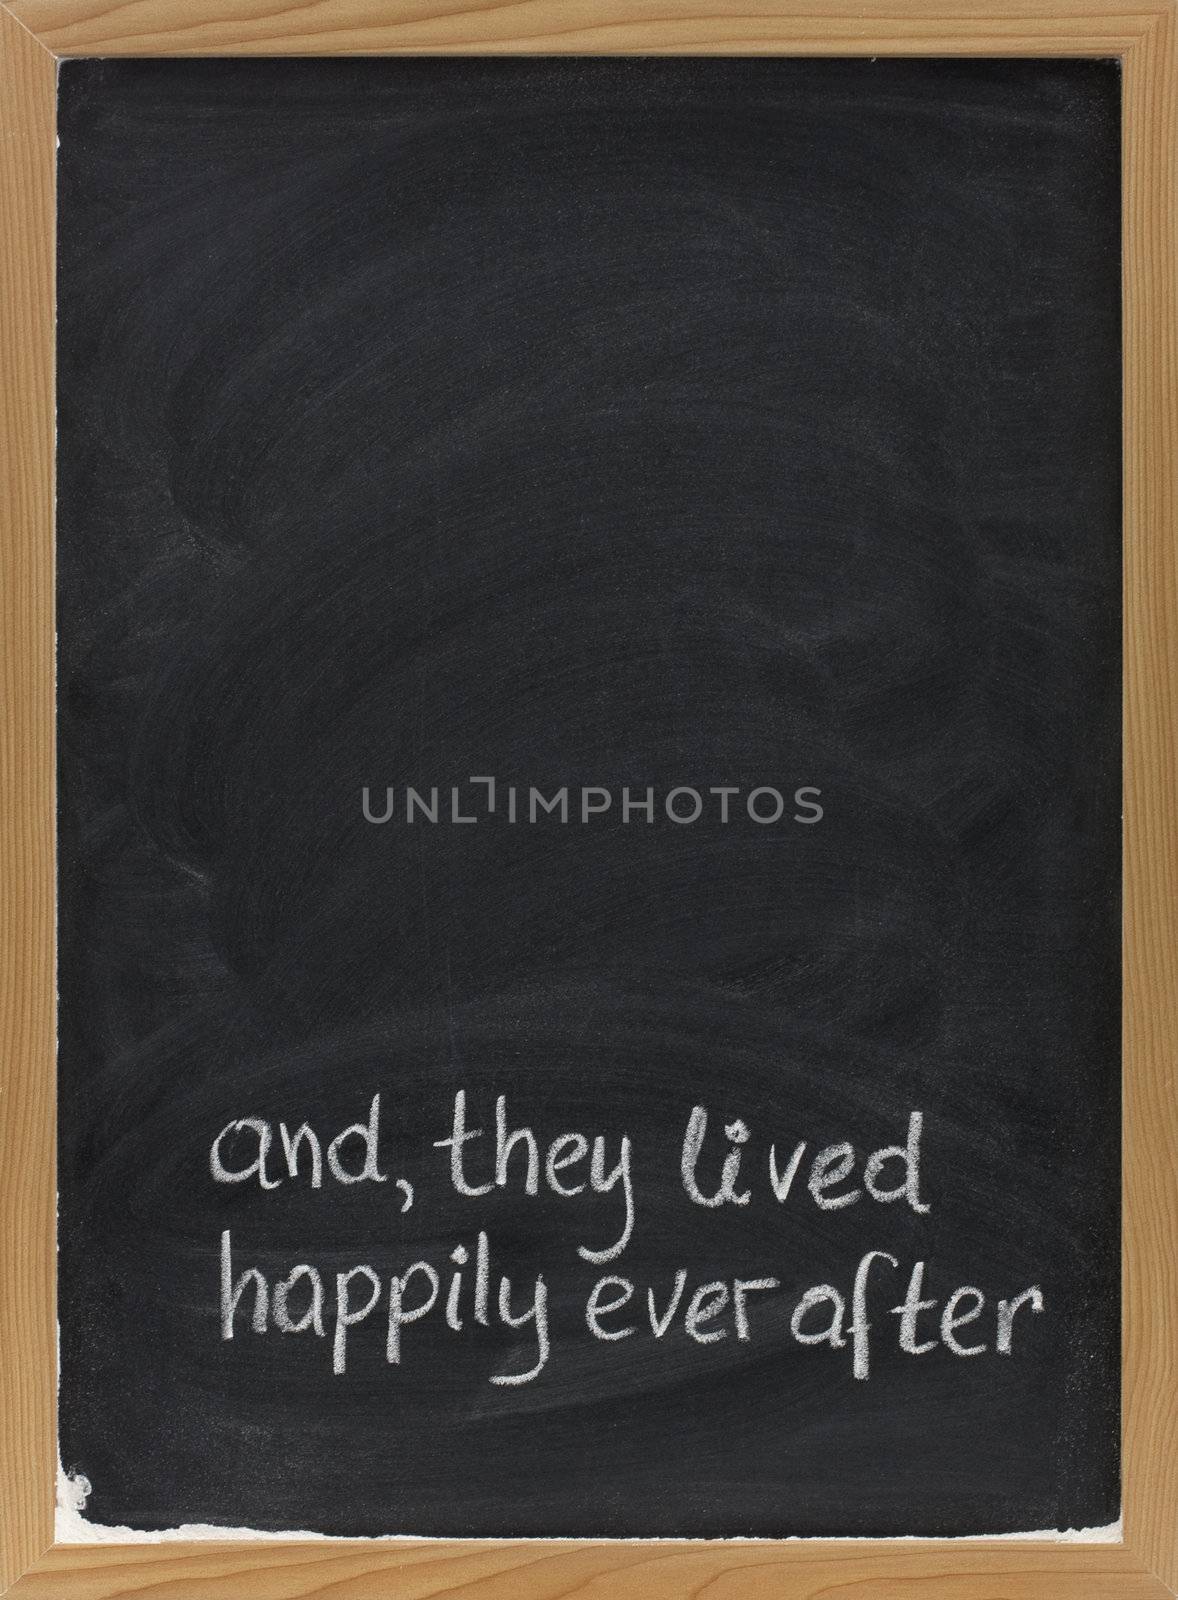 and, they lived happily ever after -  stock phrase for ending oral narratives or fairytale handwritten with white chalk on blackboard, copy space above